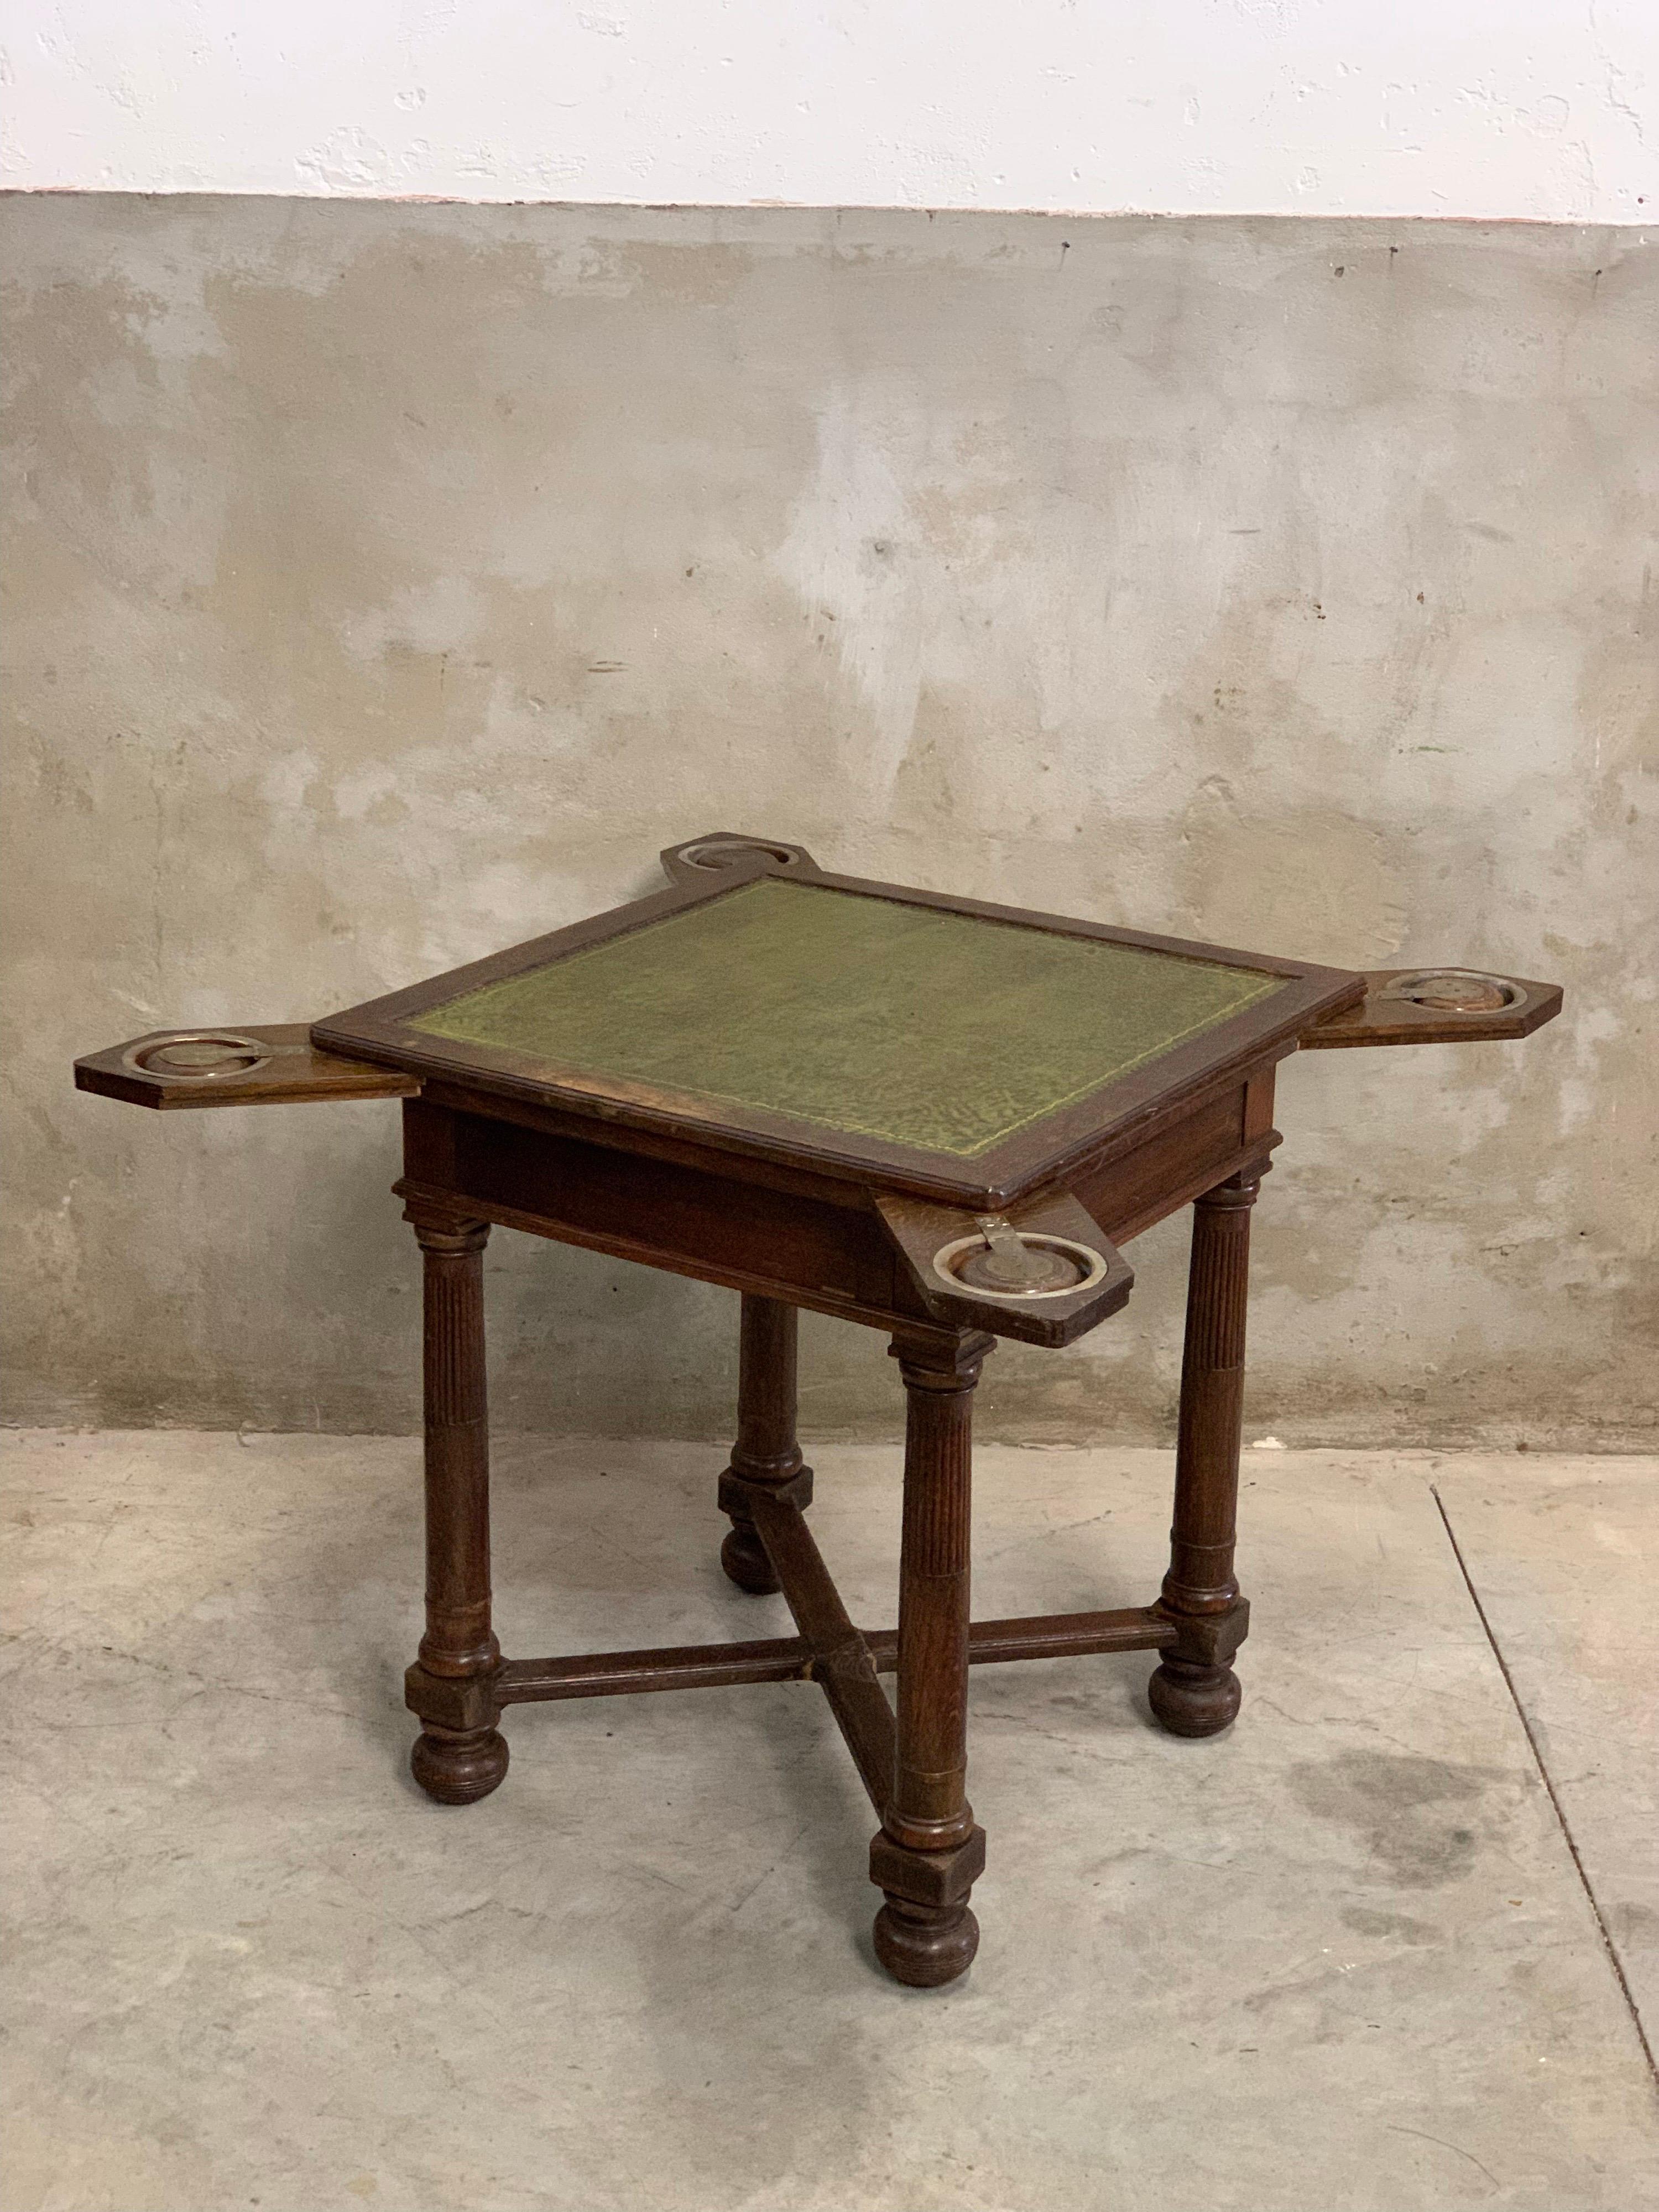 Great this antique English card table with an ingenious system where you can conjure up 4 ashtrays and chips holders from the corner with 1 movement! Also called Bridge table. We have used some nice glasses (not included) which it is also perfect